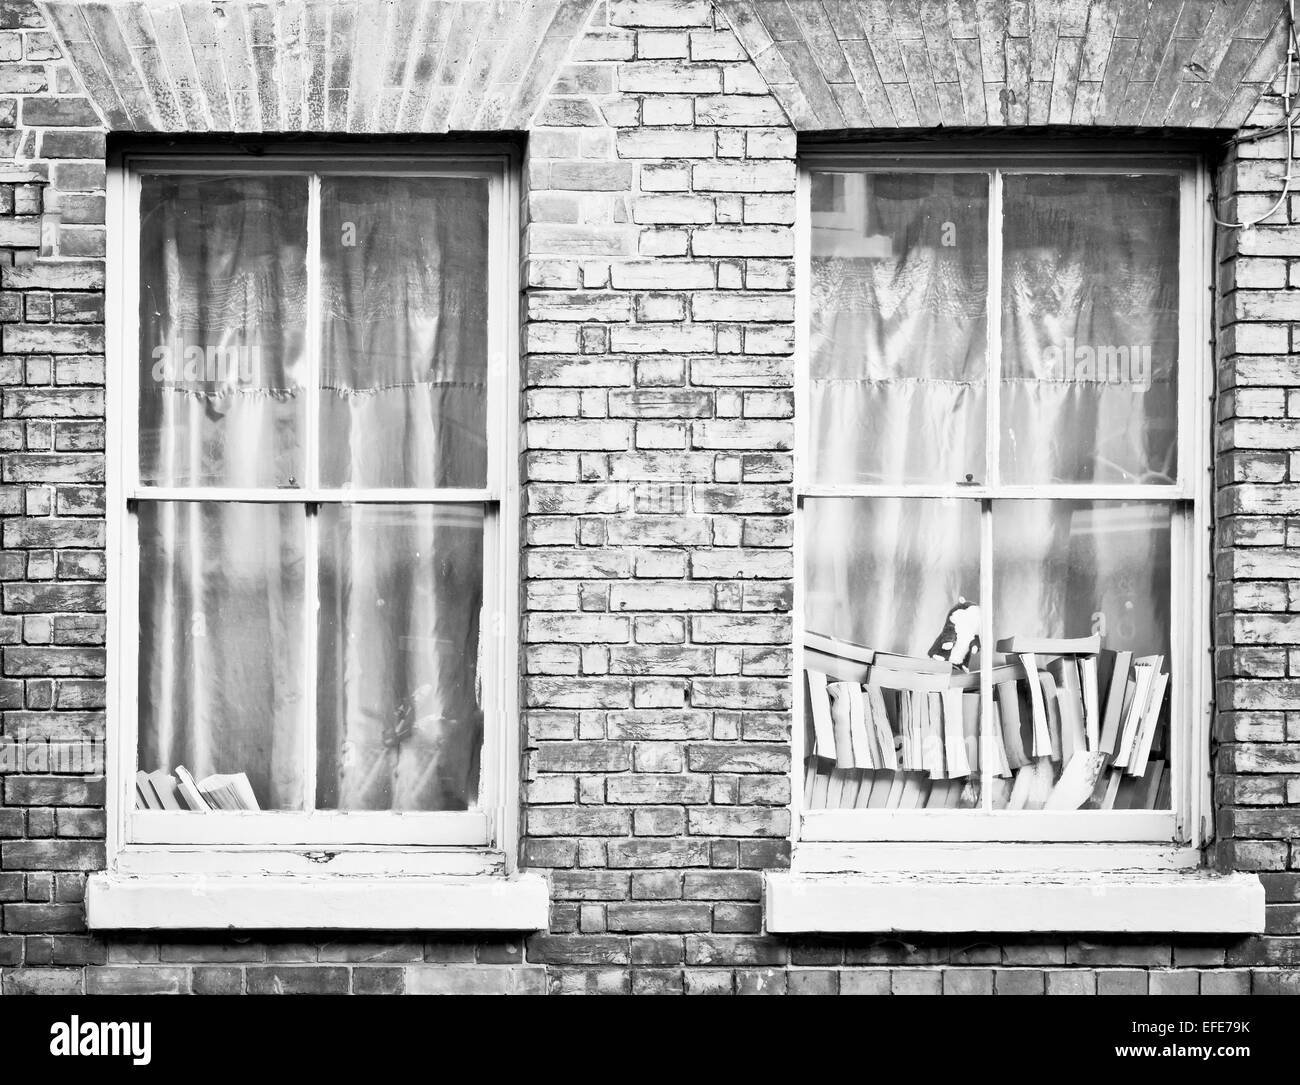 Piles of books in a house window Stock Photo